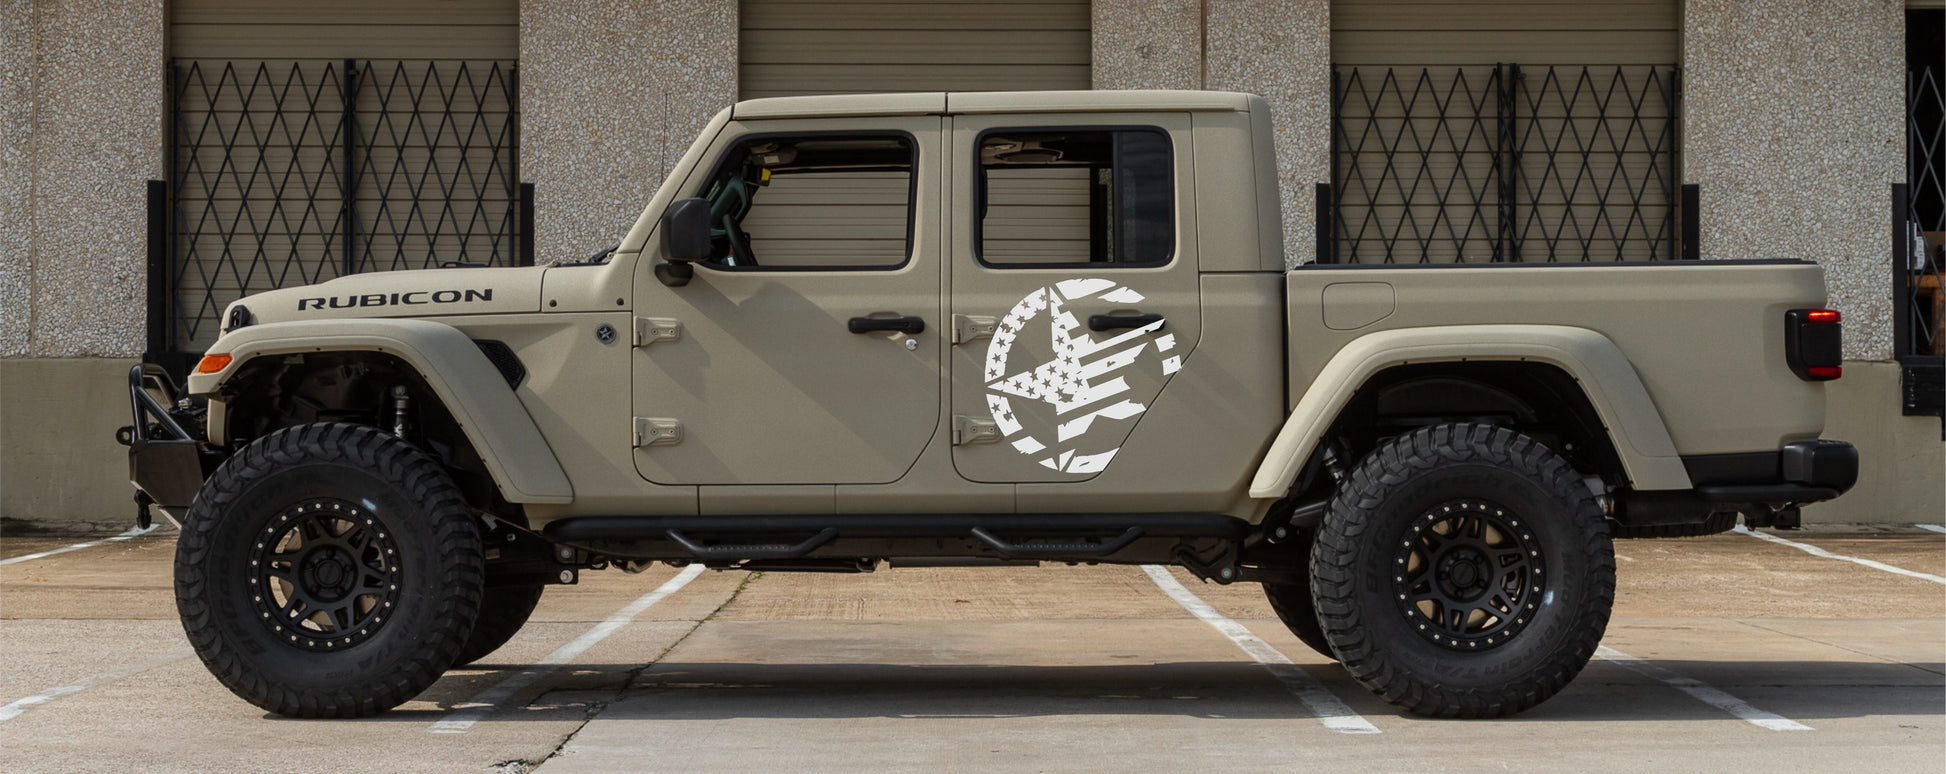 Copy of Jeep Gladiator Decal Gladiator American Flag Military Star Decal Stickers